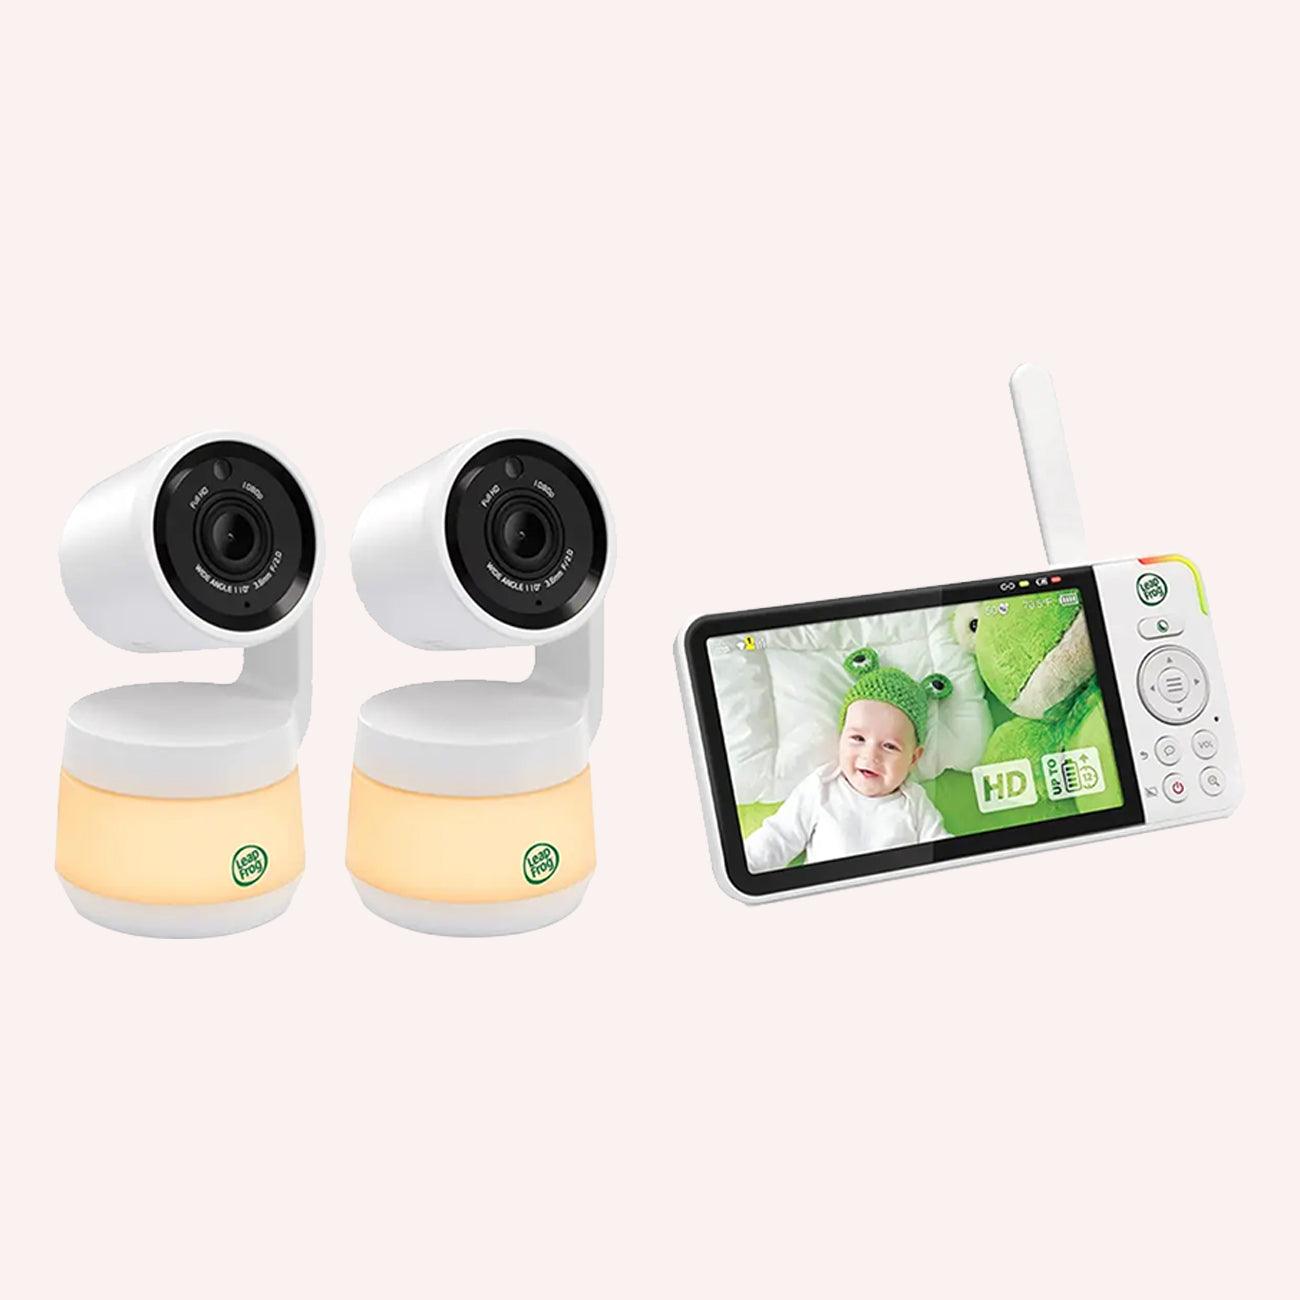 2-Camera Wi-Fi HD Pan & Tilt Video Monitor with Remote Access